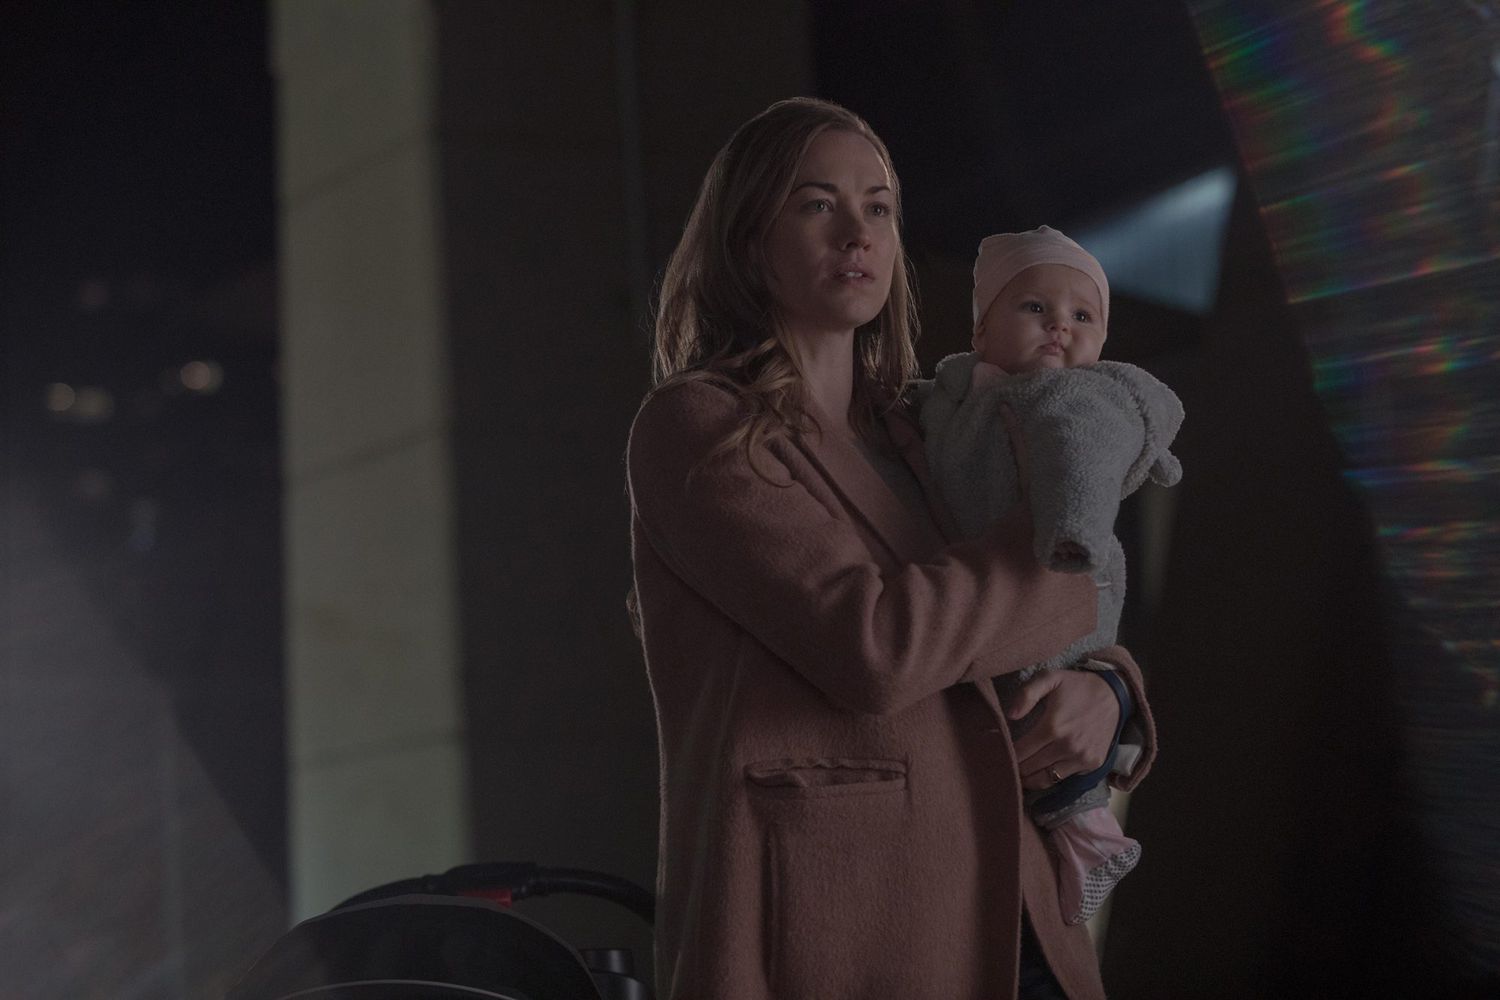 The Handmaid's Tale -- "Mayday" - Episode 313 -- With her plan in place, June reaches the point of no return on her bold strike against Gilead and must decide how far she's willing to go. Serena Joy and Commander Waterford attempt to find their way forward in their new lives. Serena (Yvonne Strahovski), shown.